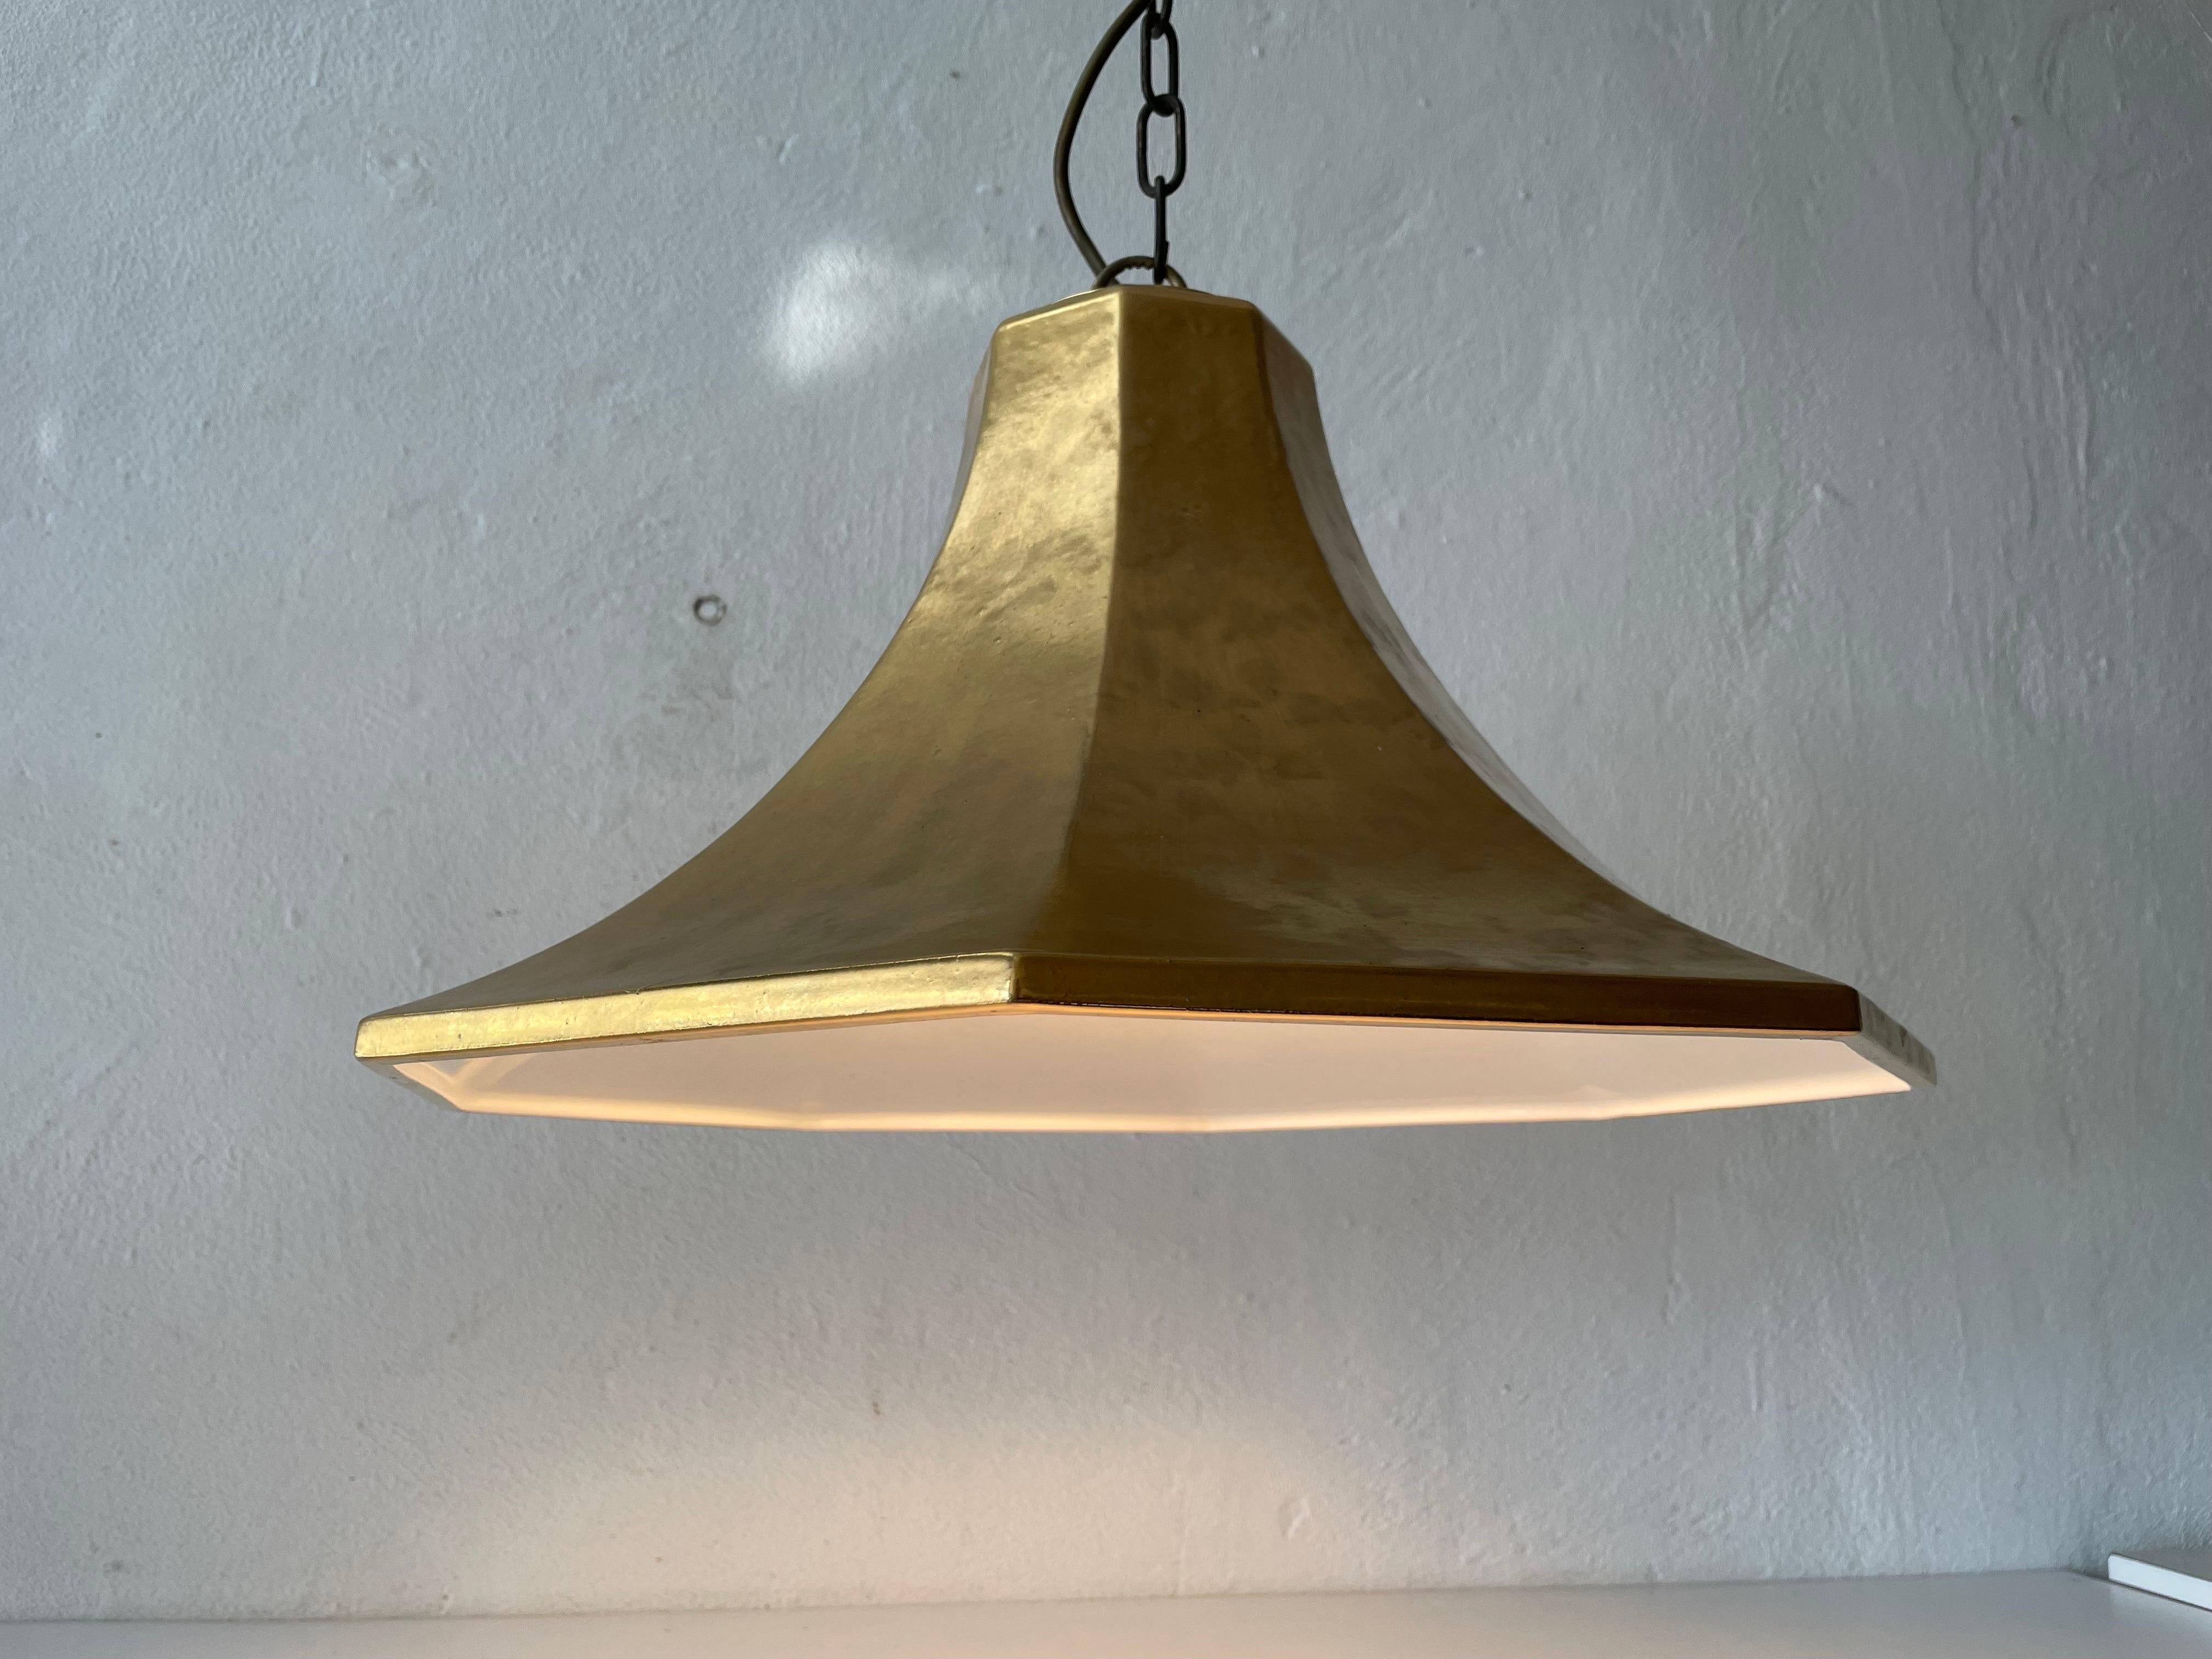 Exclusive Gold Ceramic Pendant Lamp by Licht+Wohnen, Karlsruhe, 1970s, Germany For Sale 7